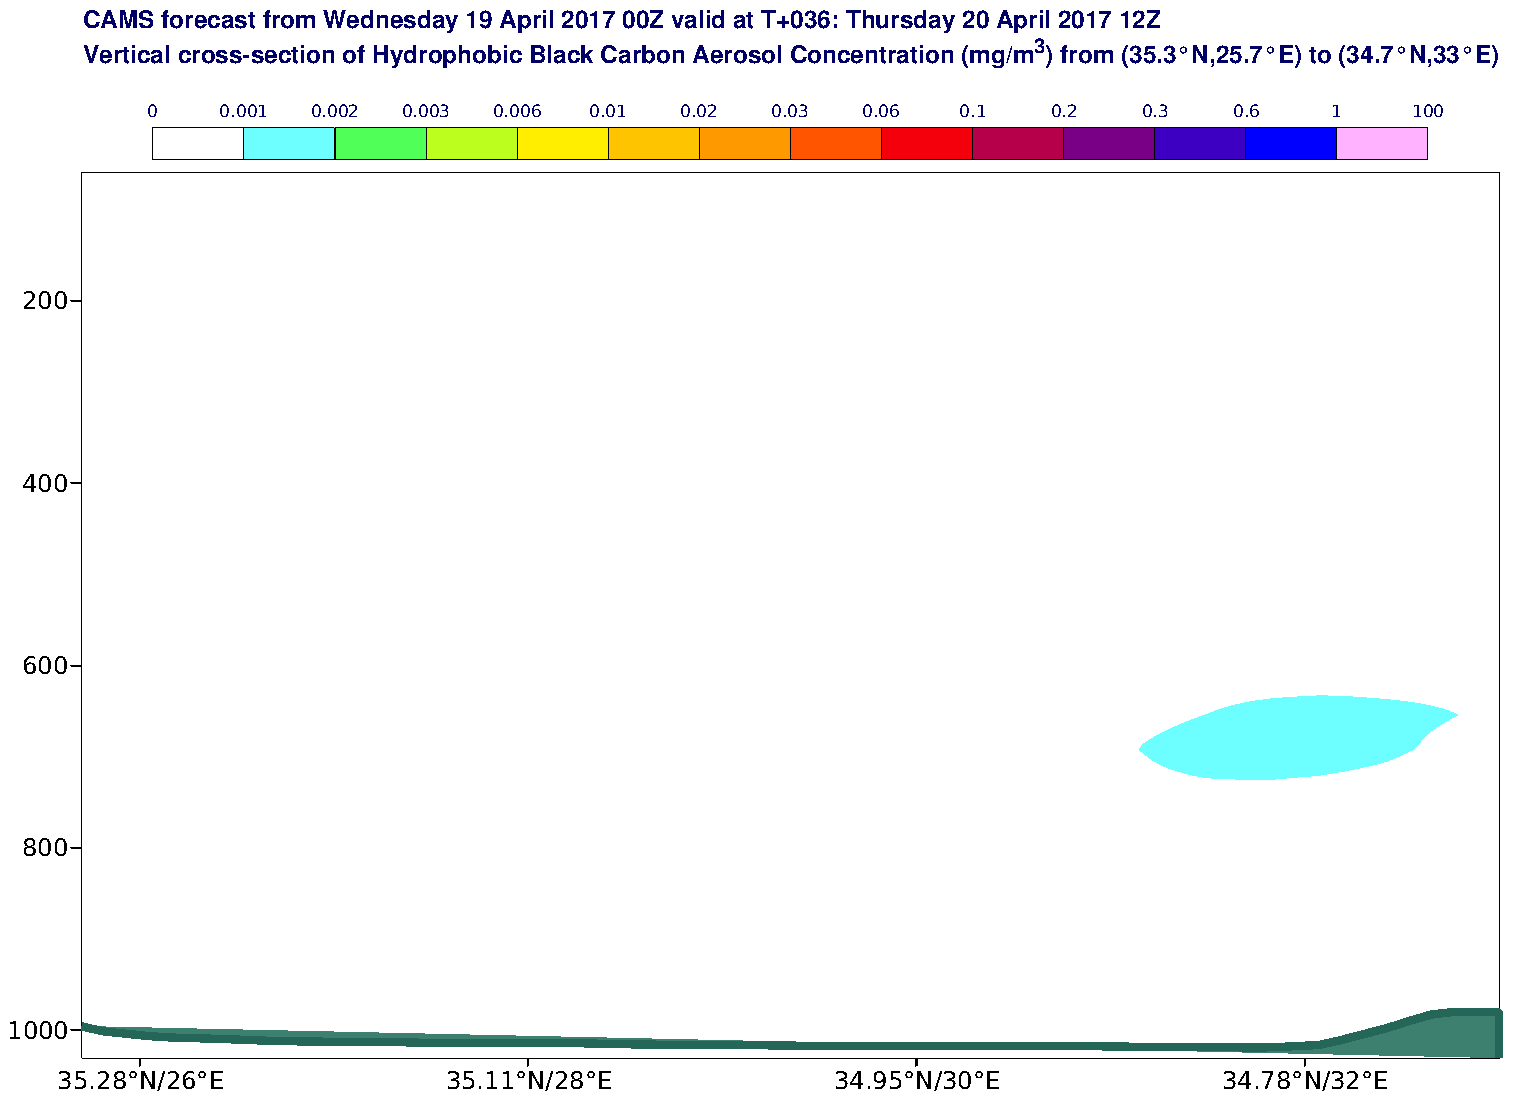 Vertical cross-section of Hydrophobic Black Carbon Aerosol Concentration (mg/m3) valid at T36 - 2017-04-20 12:00